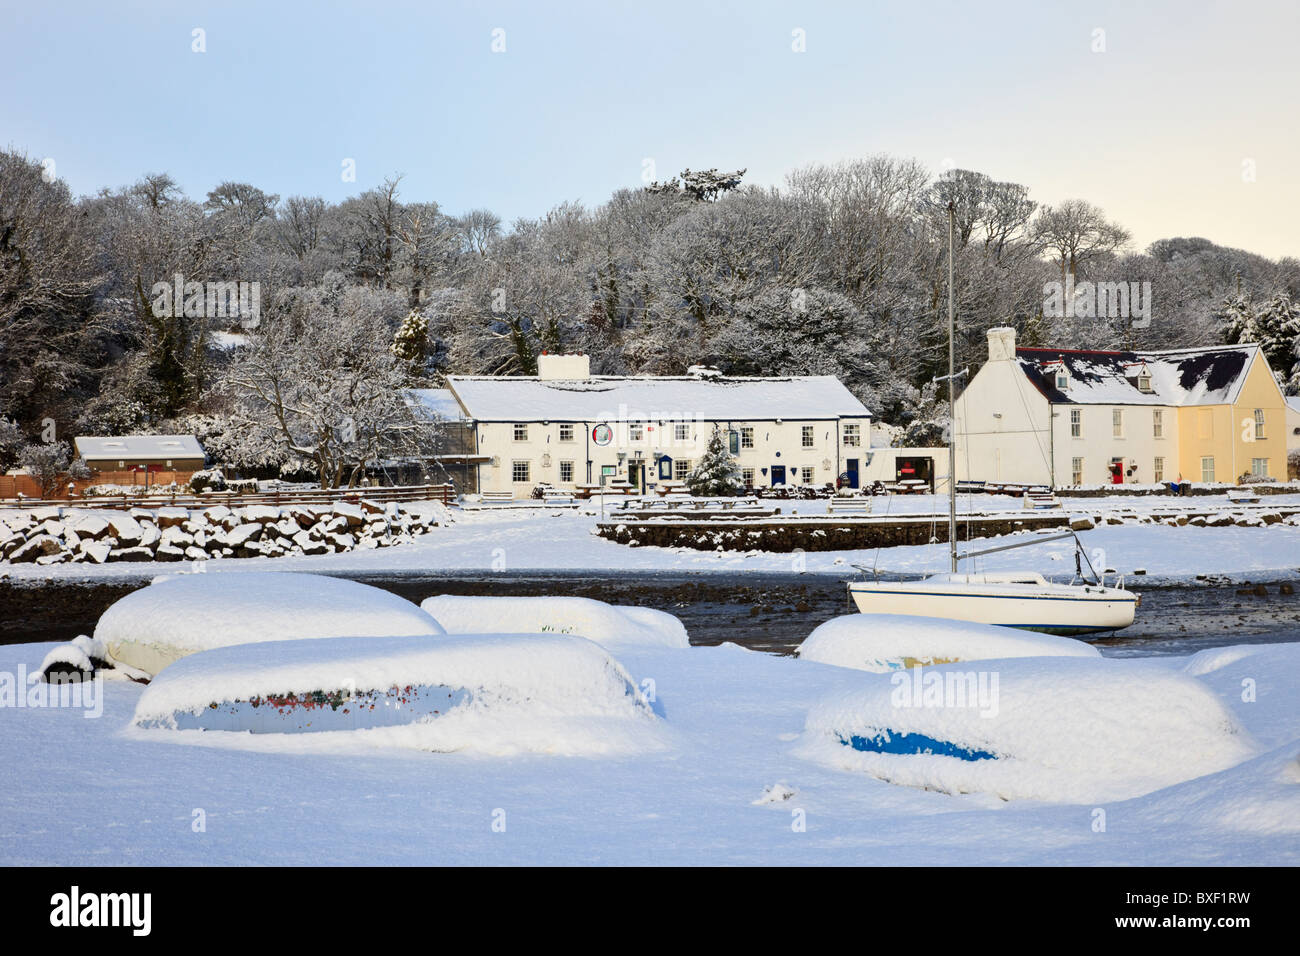 Snow scene with upturned boats on snowy coast in winter December 2010. Red Wharf Bay (Traeth Coch), Isle of Anglesey, North Wales, UK. Stock Photo